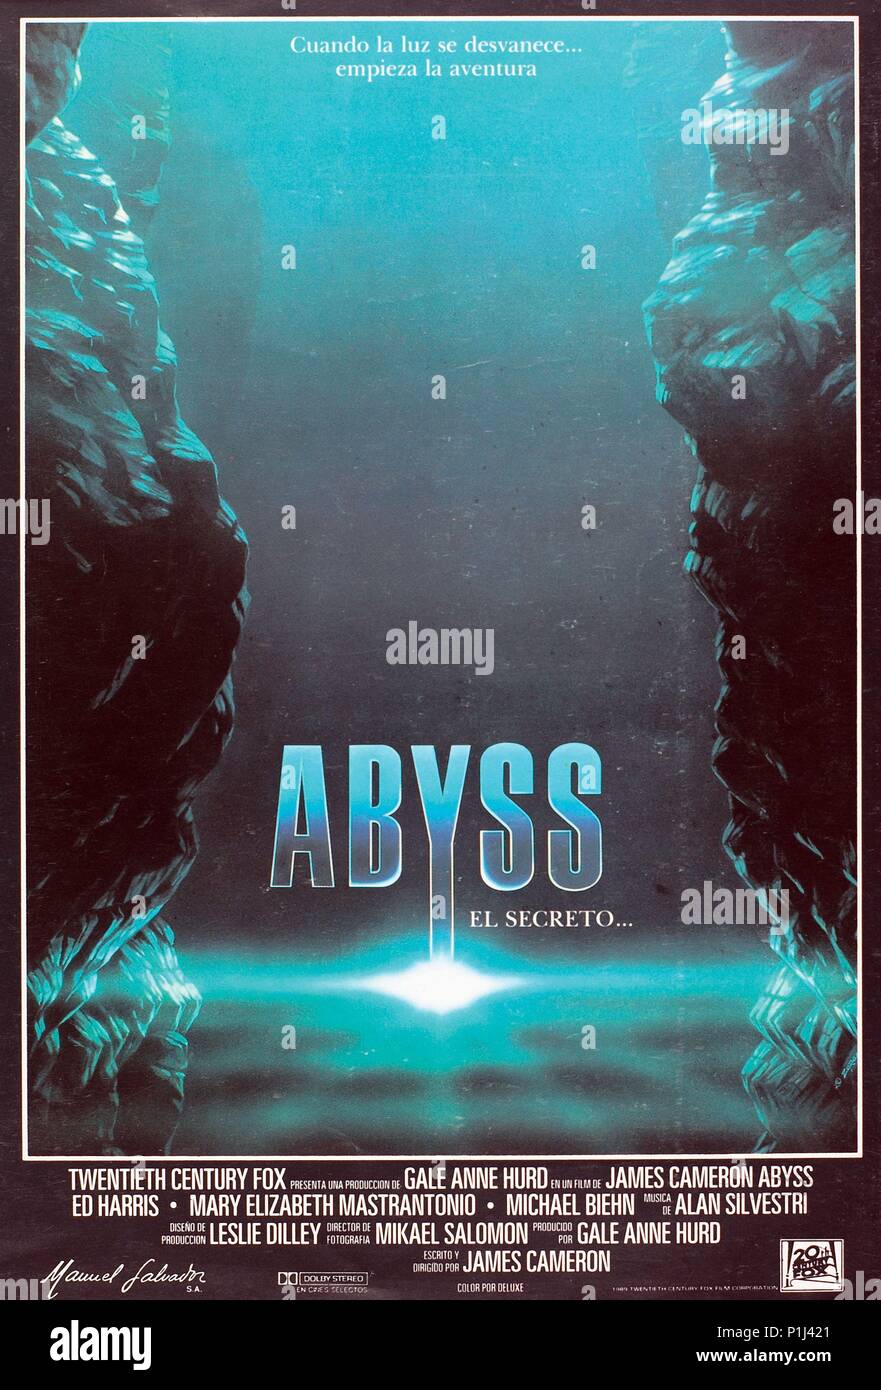 Original Film Title: THE ABYSS.  English Title: THE ABYSS.  Film Director: JAMES CAMERON.  Year: 1989. Credit: 20TH CENTURY FOX / Album Stock Photo